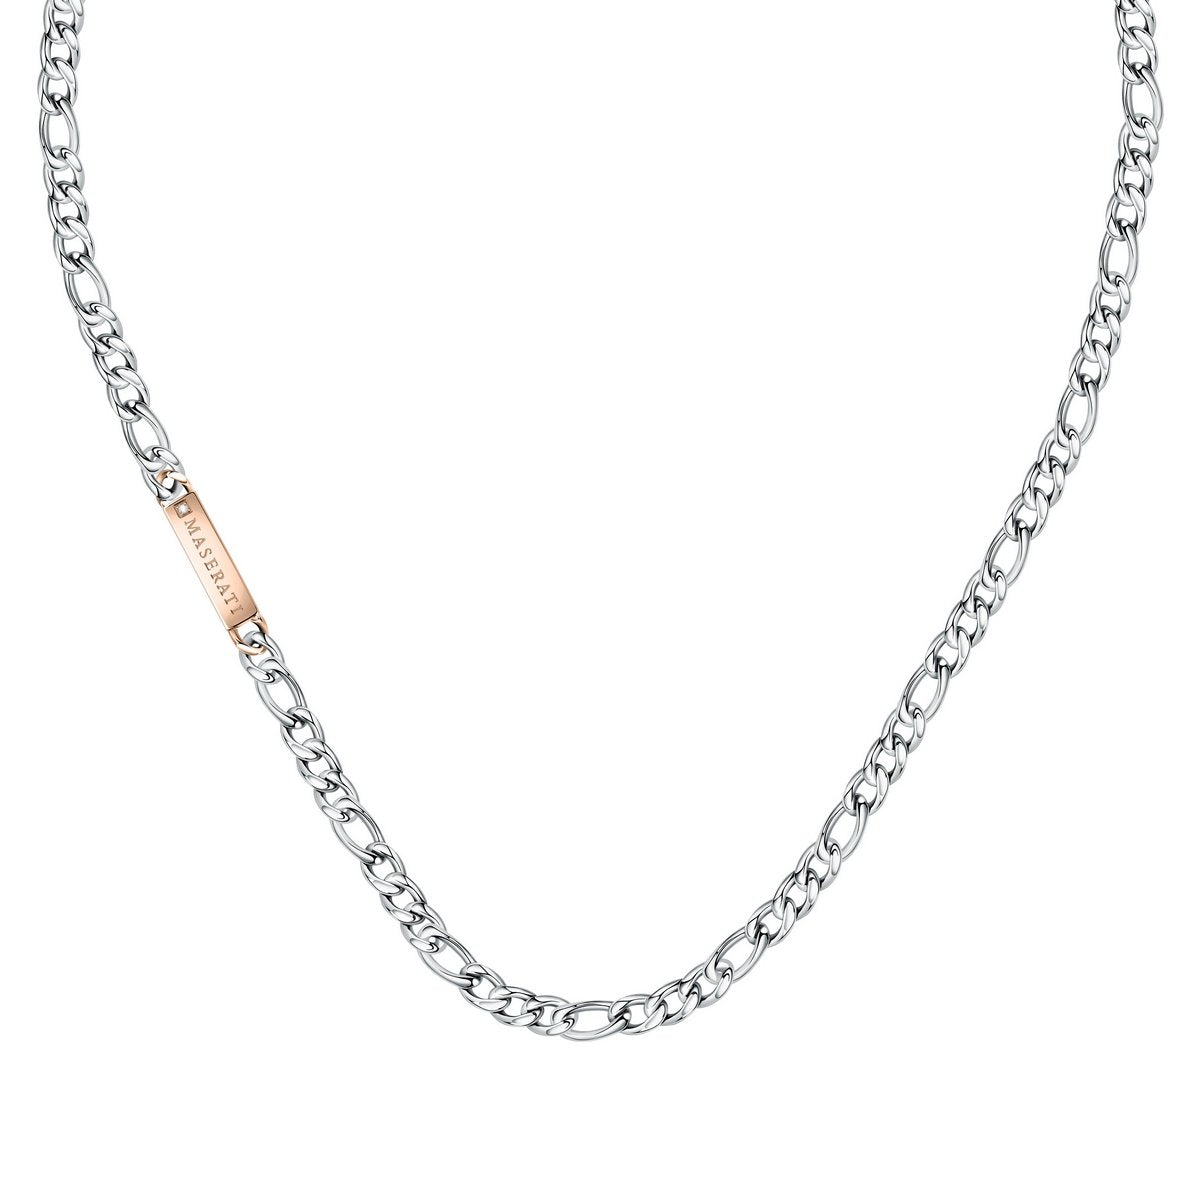 MASERATI JEWELS SILVER,ROSE GOLD NECKLACE 500mm LOBSTER BUCKLE